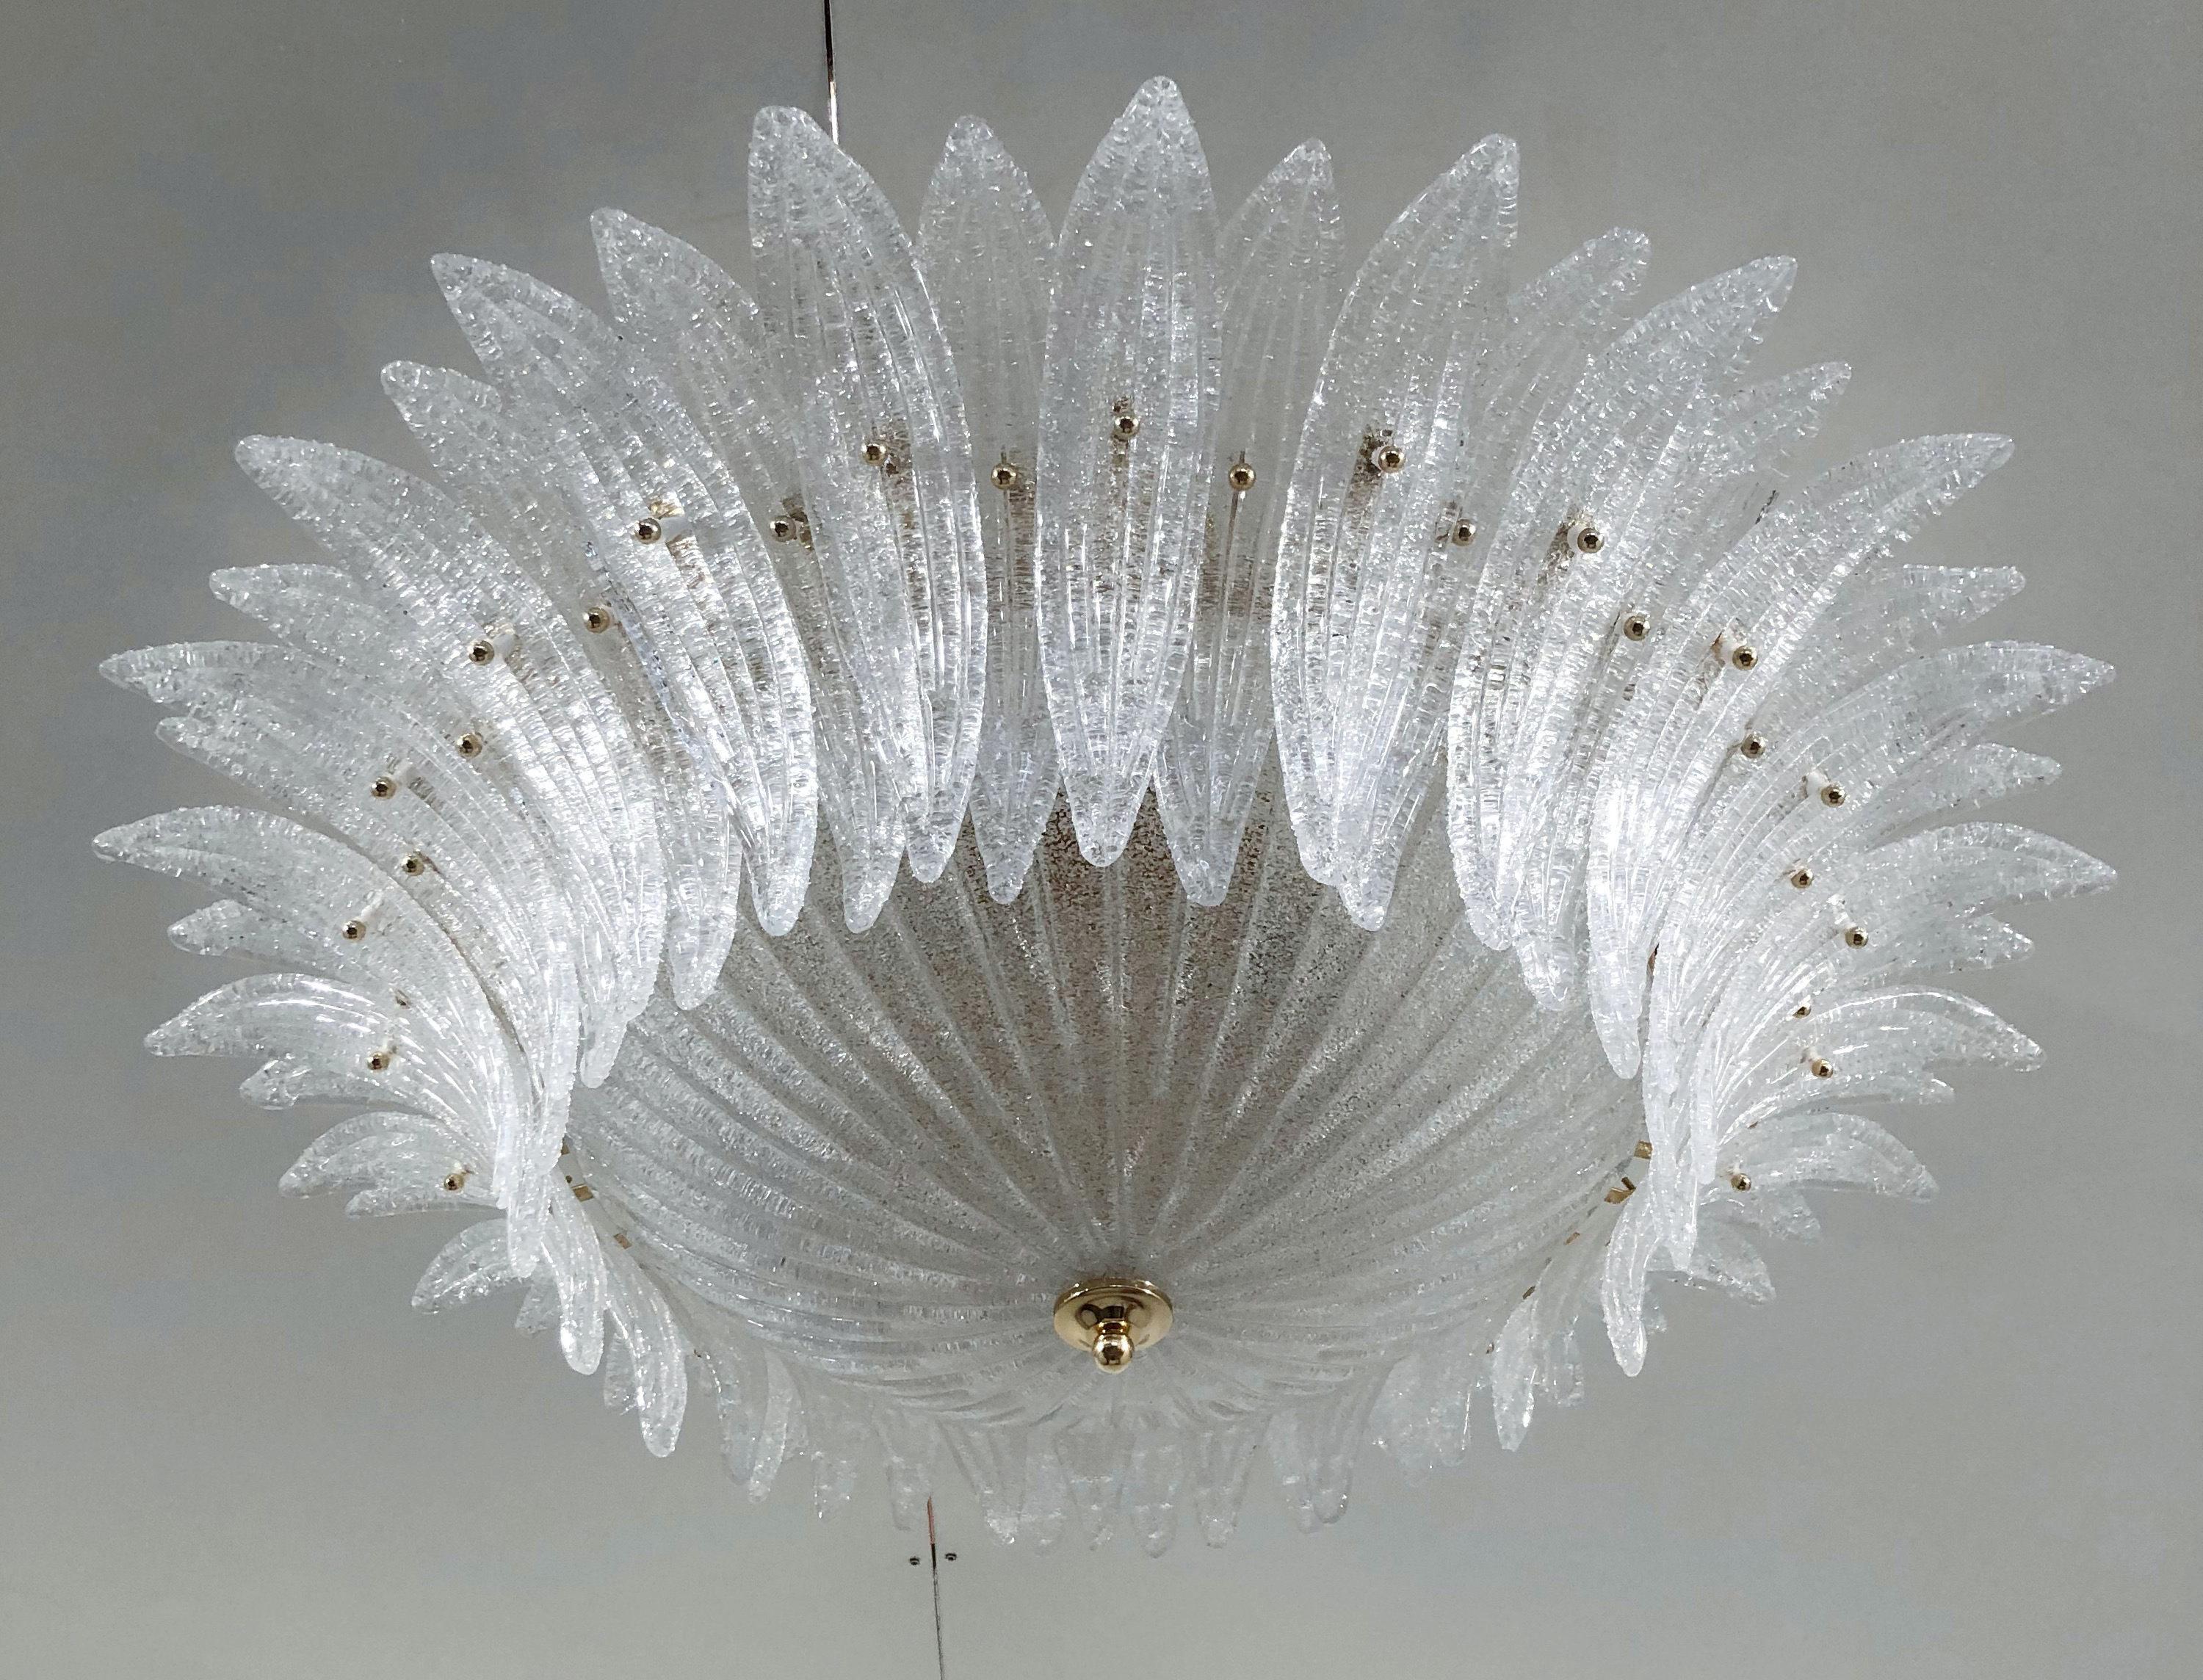 Italian Palmette flush mount chandelier shown in clear Murano glass leaves with granular texture using Graniglia technique, mounted on 24k gold plated metal finish frame / Made in Italy
6 lights / E26 or E27 type / max 60W each
Diameter: 36 inches /